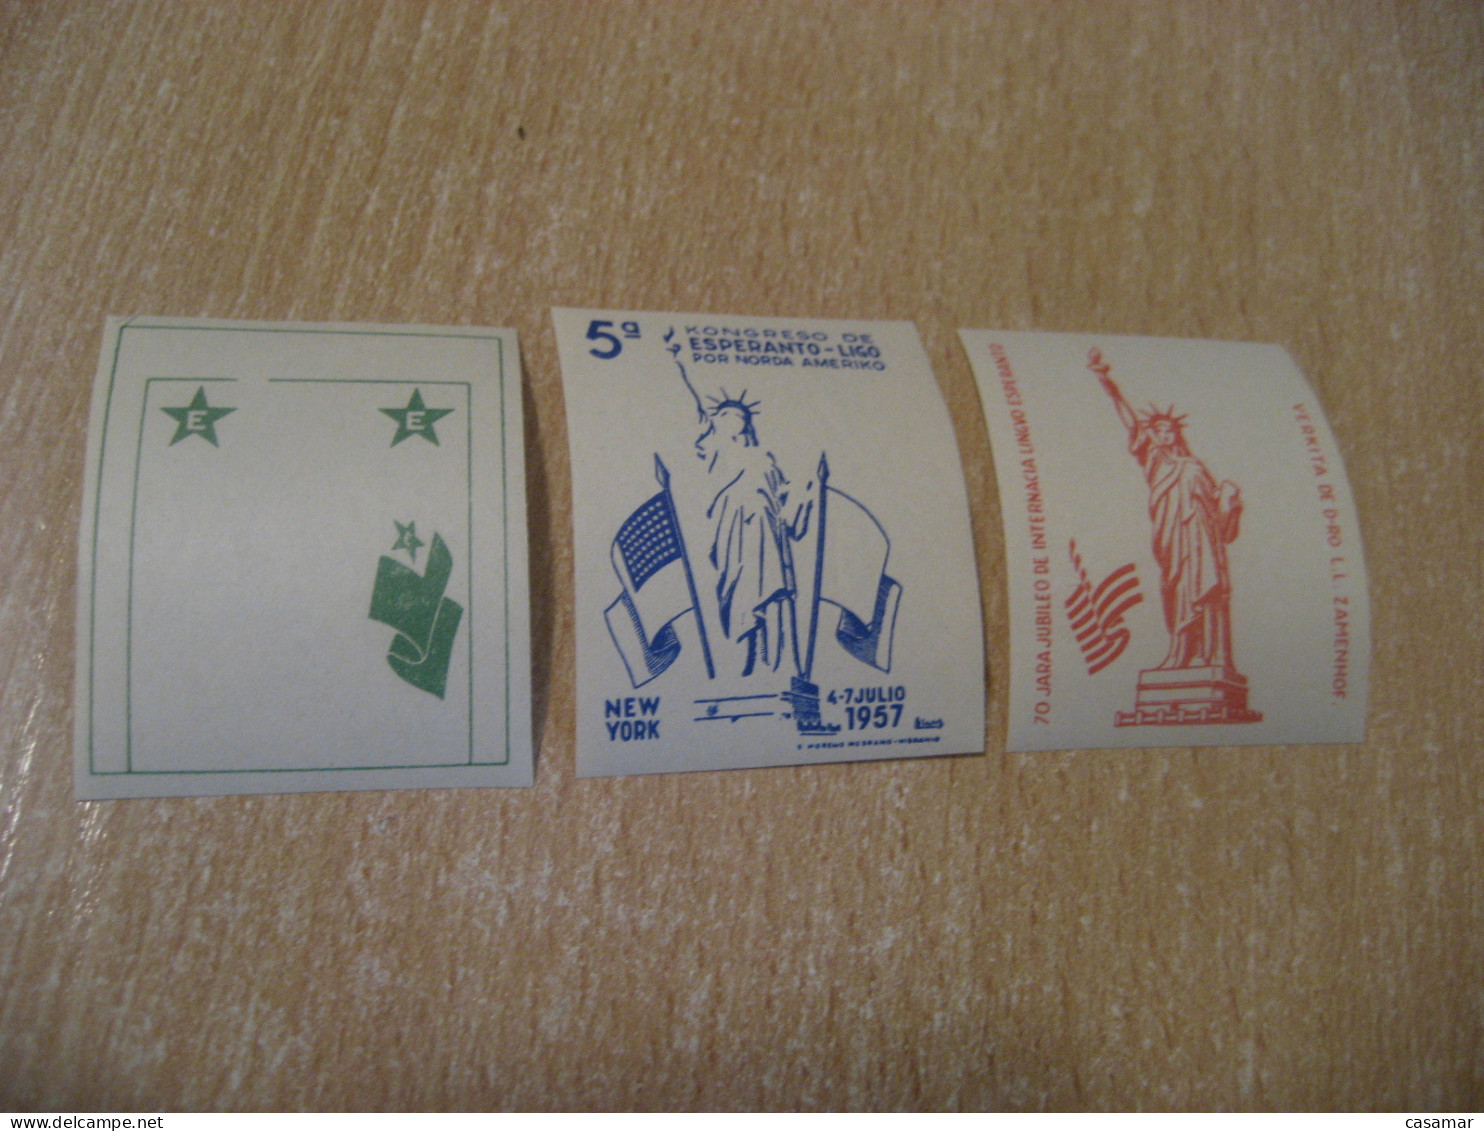 NEW YORK 1957 Esperanto Liberty Statue Flag Architecture Error Proof Colour Imperforated 3 Poster Stamp Vignette USA - Monuments